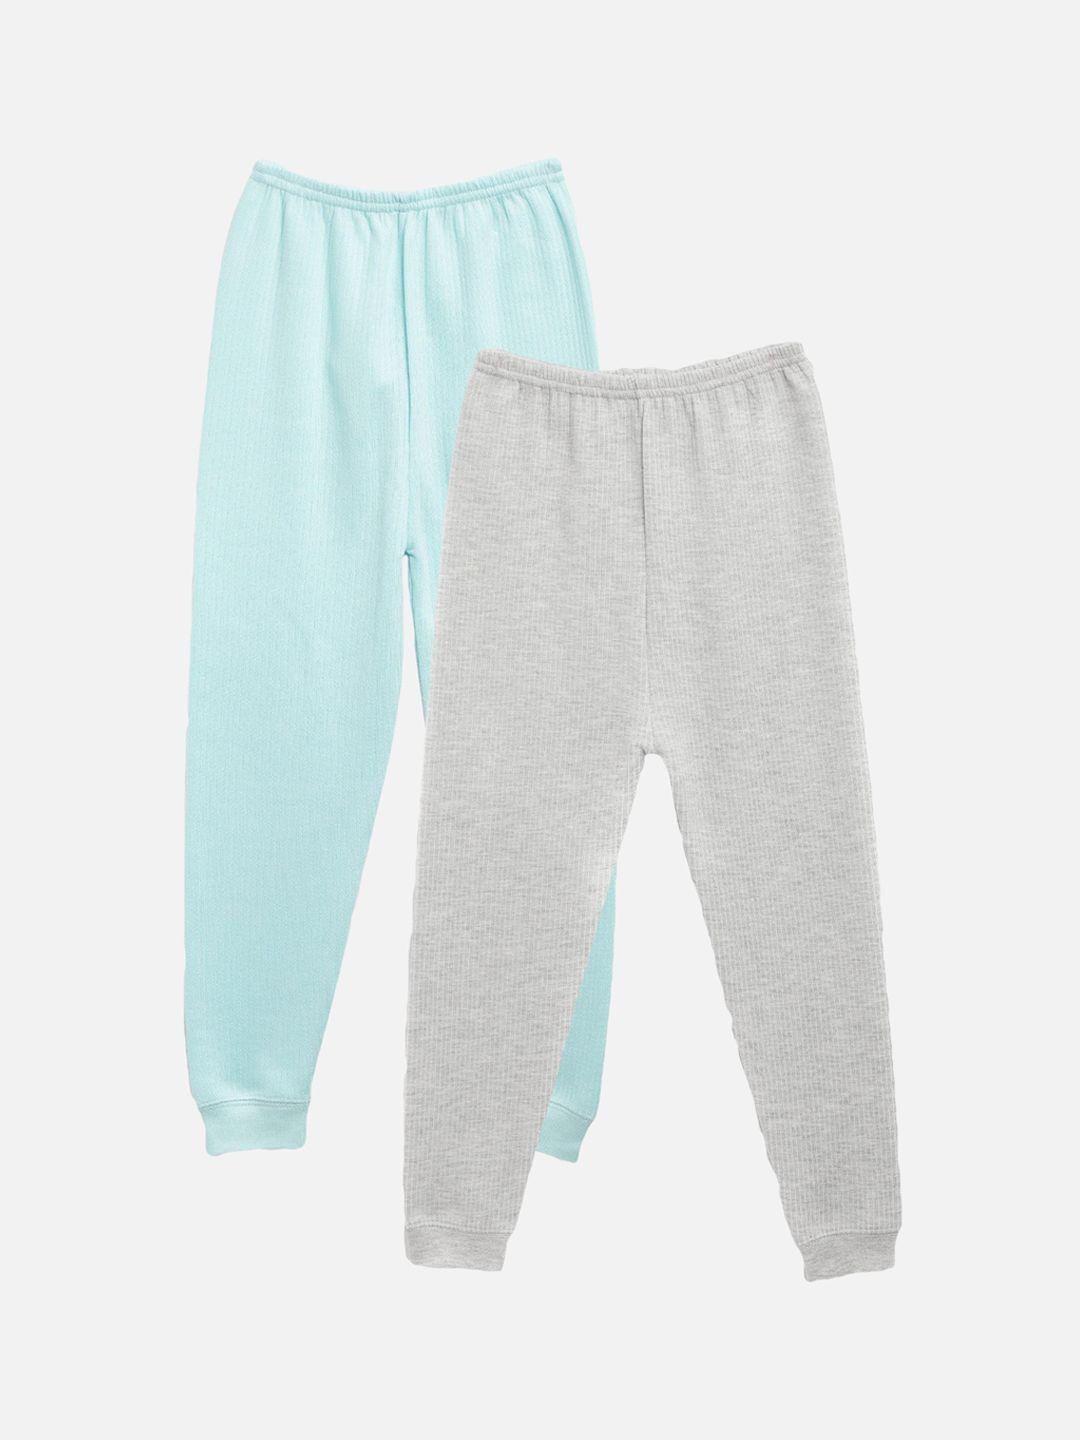 kanvin boys pack of 2 turquoise blue & grey solid thermal bottoms